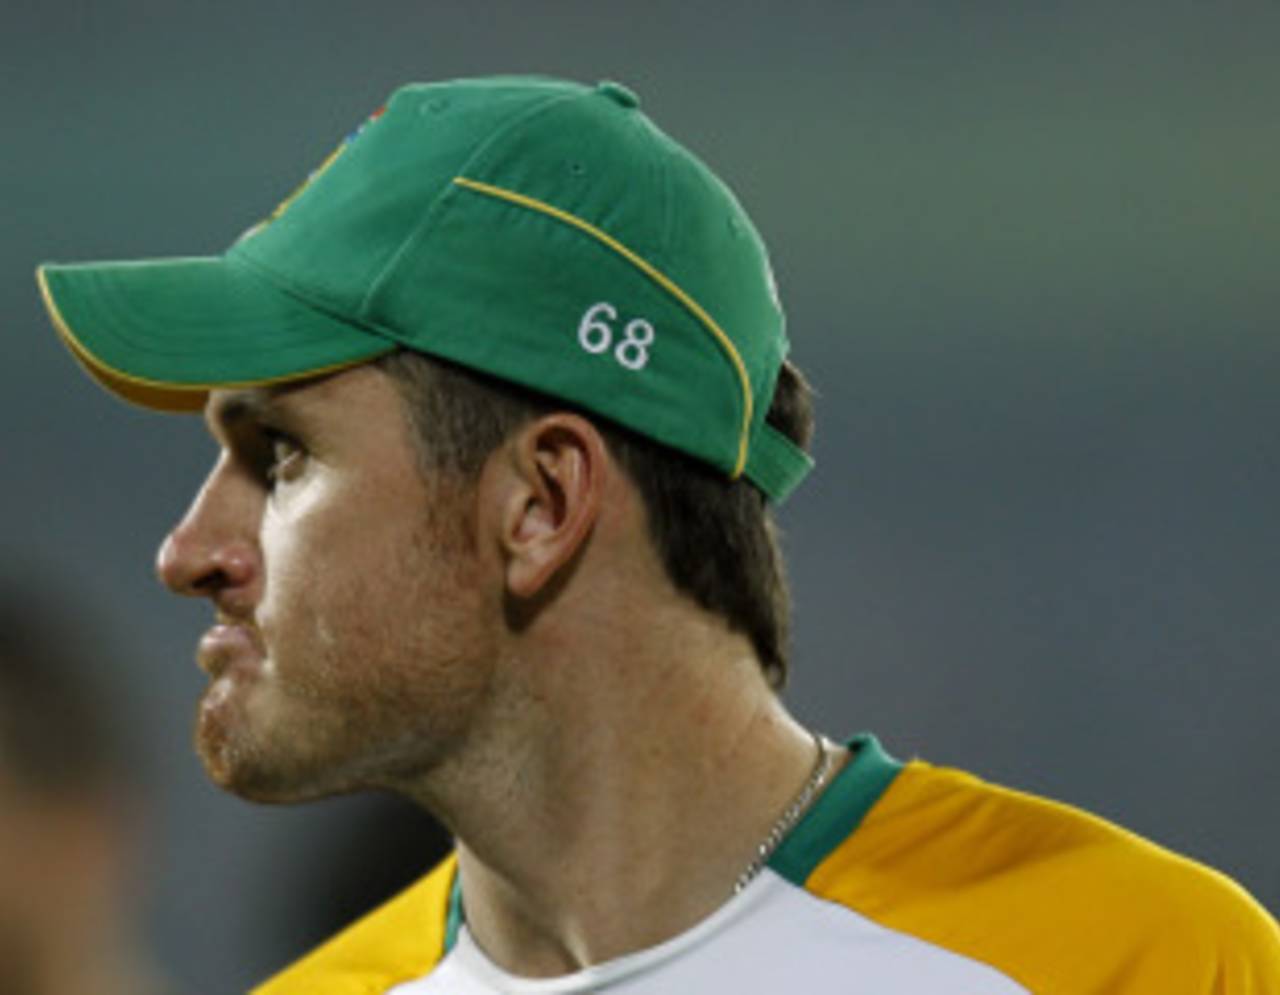 Graeme Smith received brickbats for not returning home immediately after yet another unsuccessful World Cup, but he continued as Test captain and led South Africa to a famous win over Australia at Newlands&nbsp;&nbsp;&bull;&nbsp;&nbsp;Associated Press